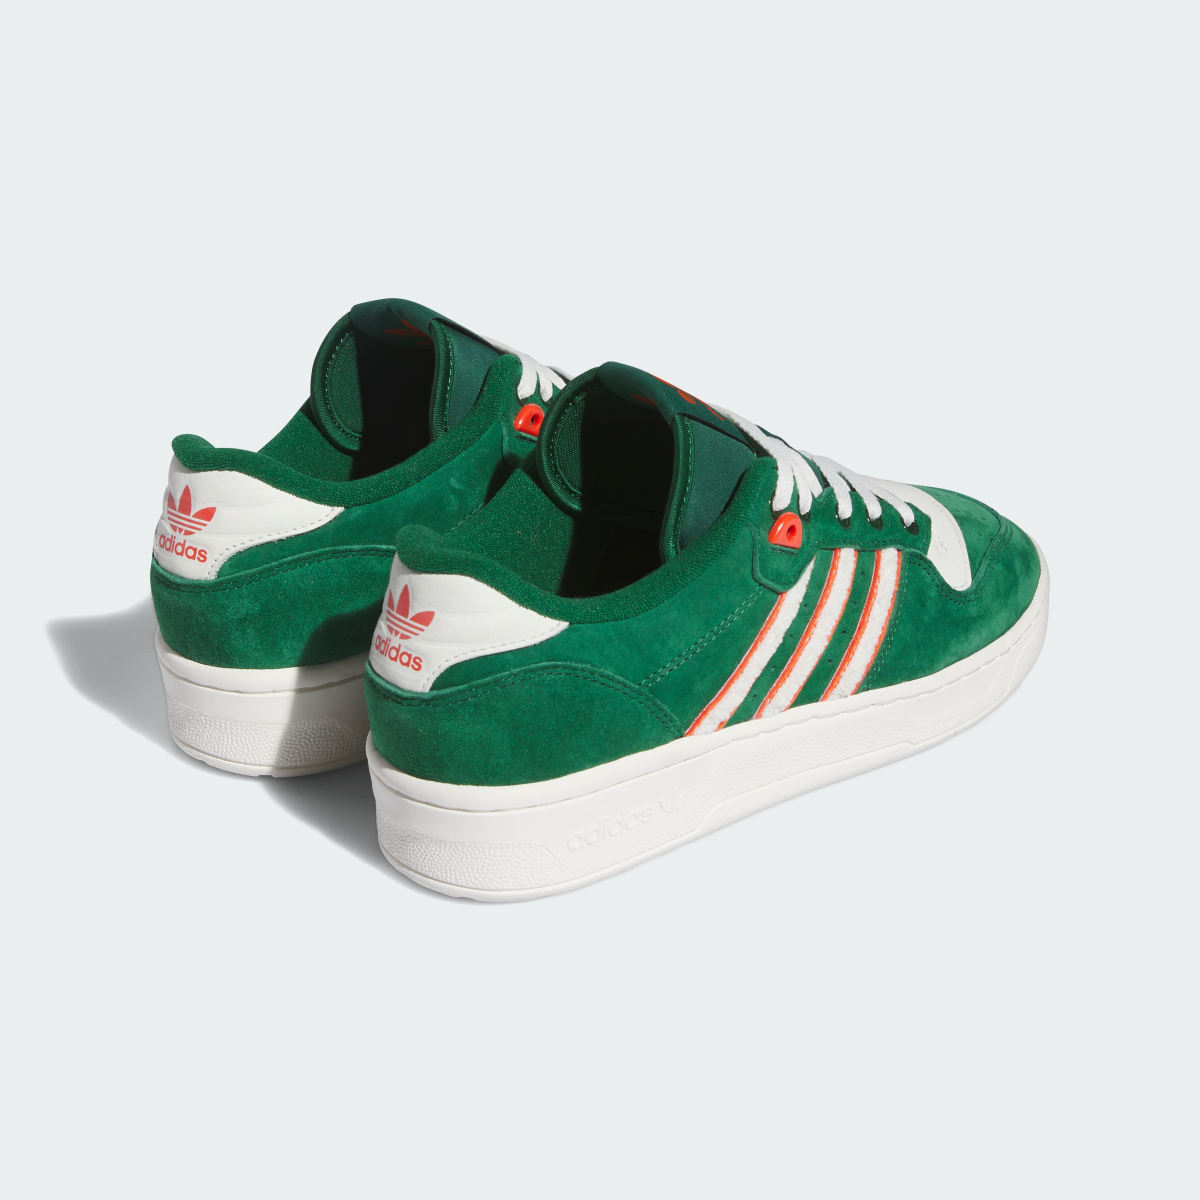 Adidas Miami Rivalry Low Shoes. 6